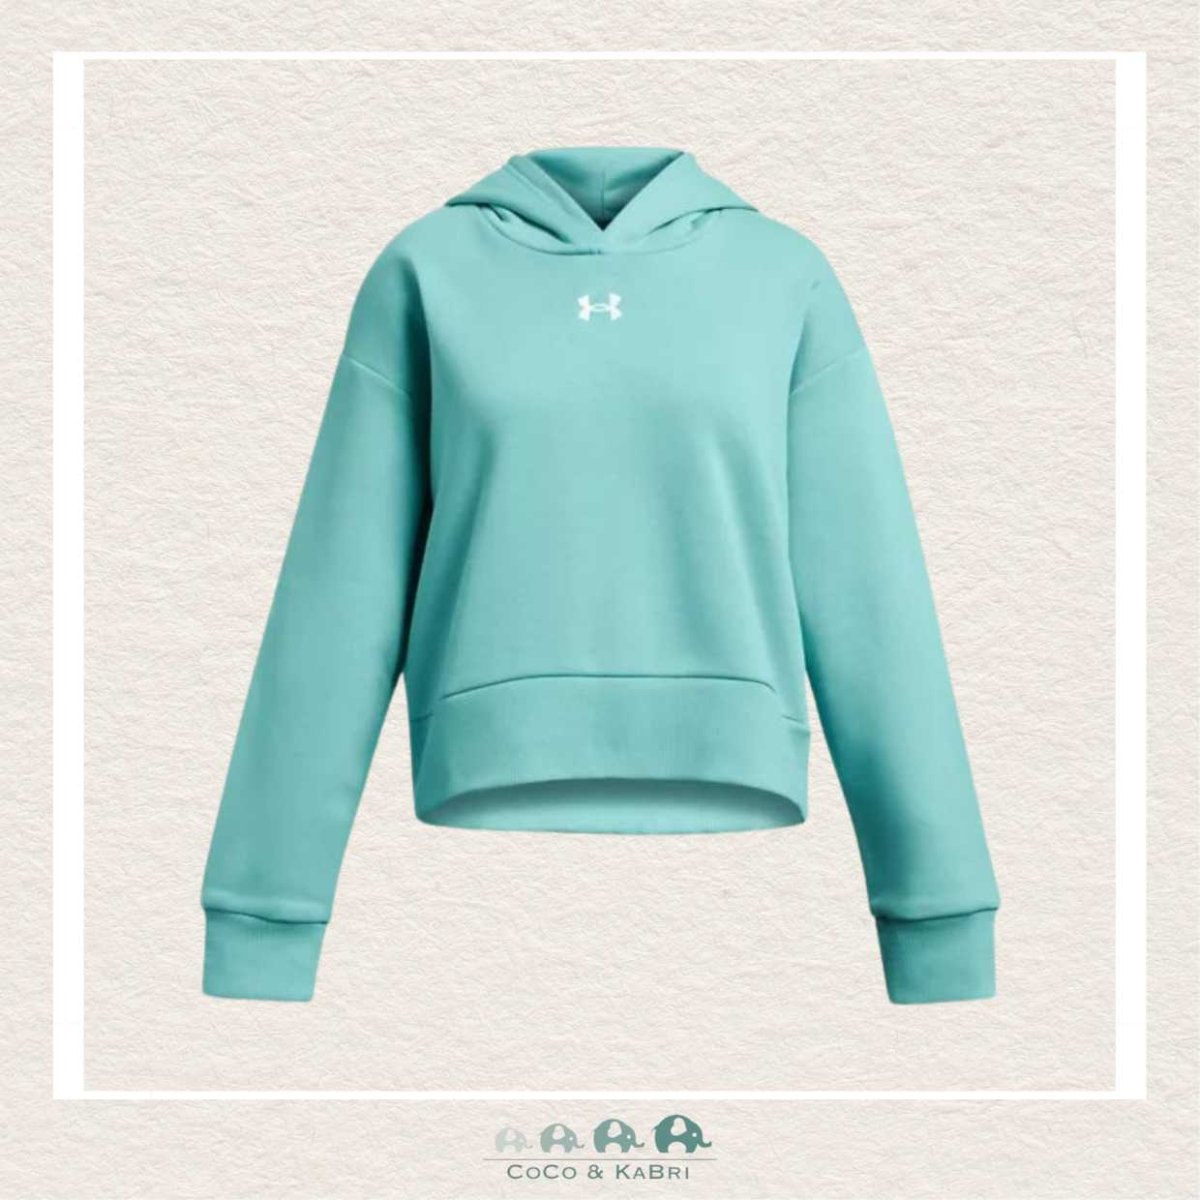 Under Armour Youth Girls' Rival Fleece Crop Hoodie - Turquoise, CoCo & KaBri Children's Boutique